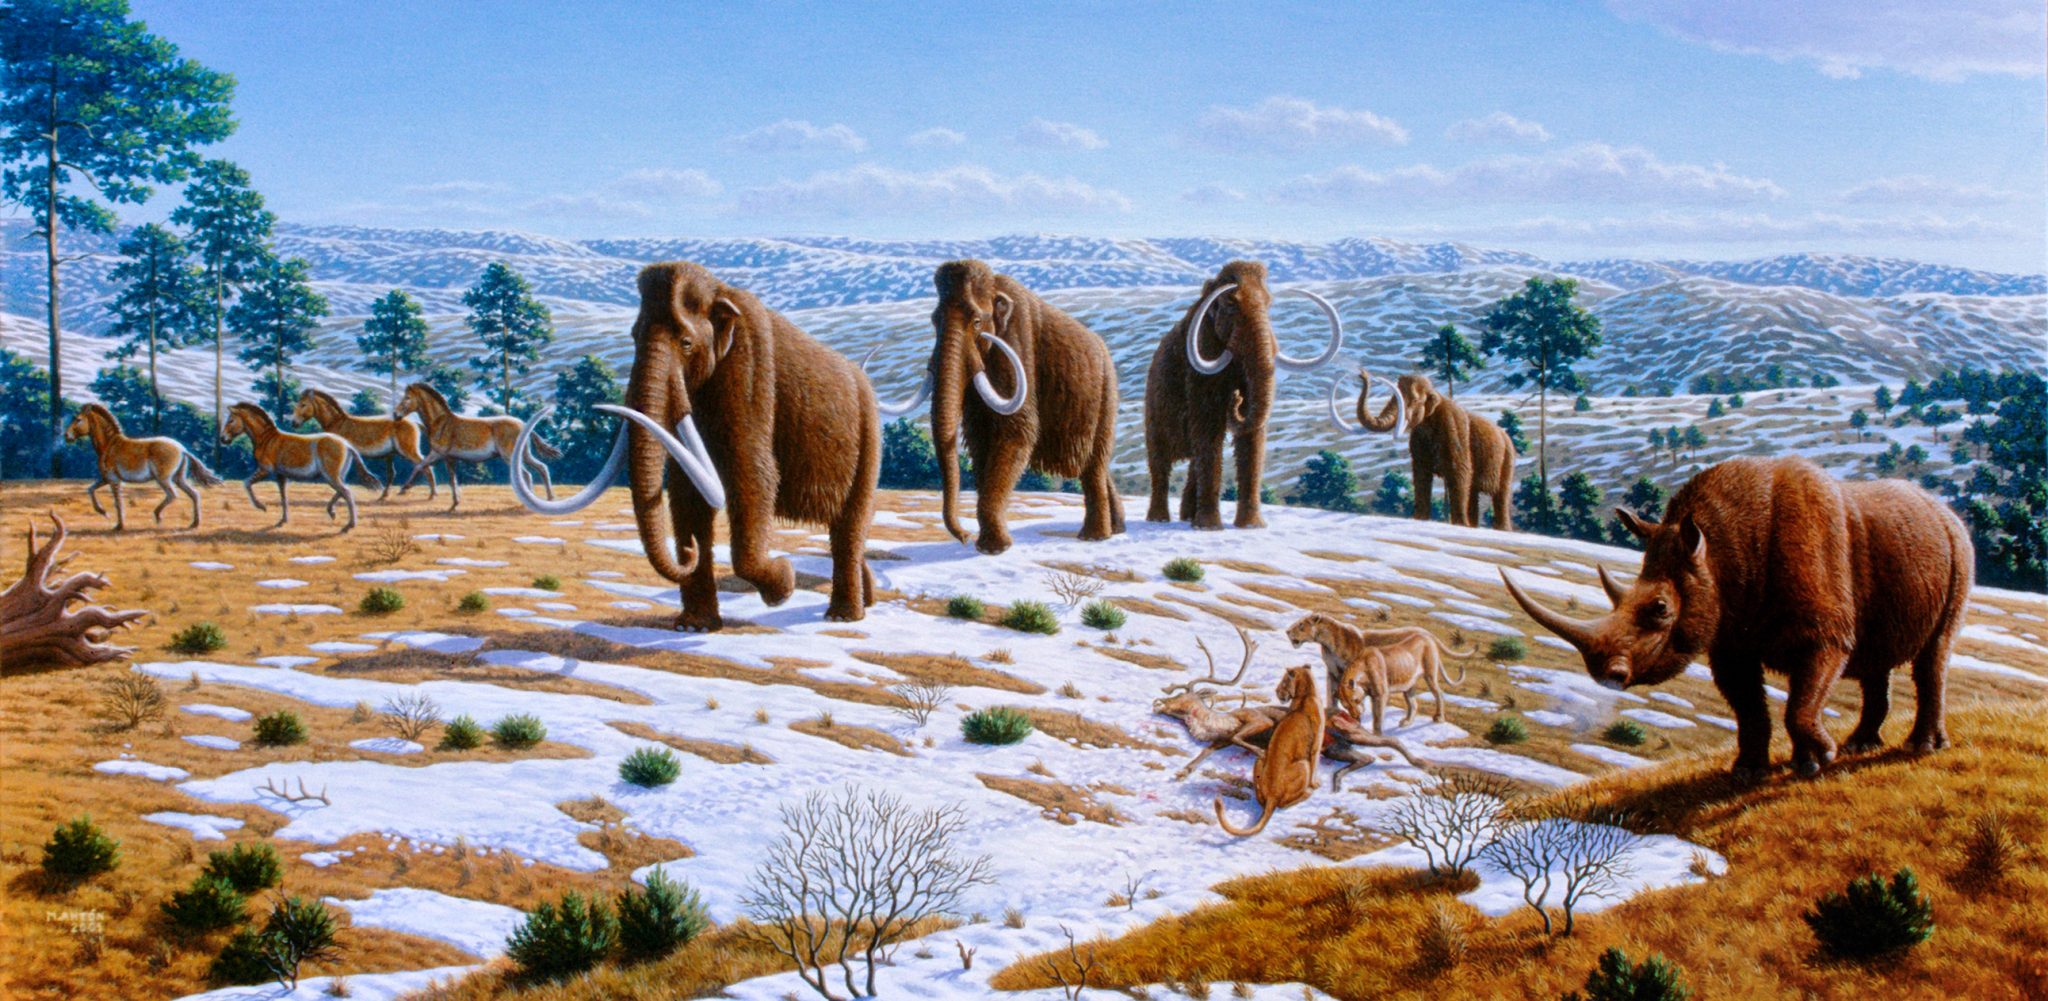 Mammoths, sabertooth tigers, and other Ice Age animals.